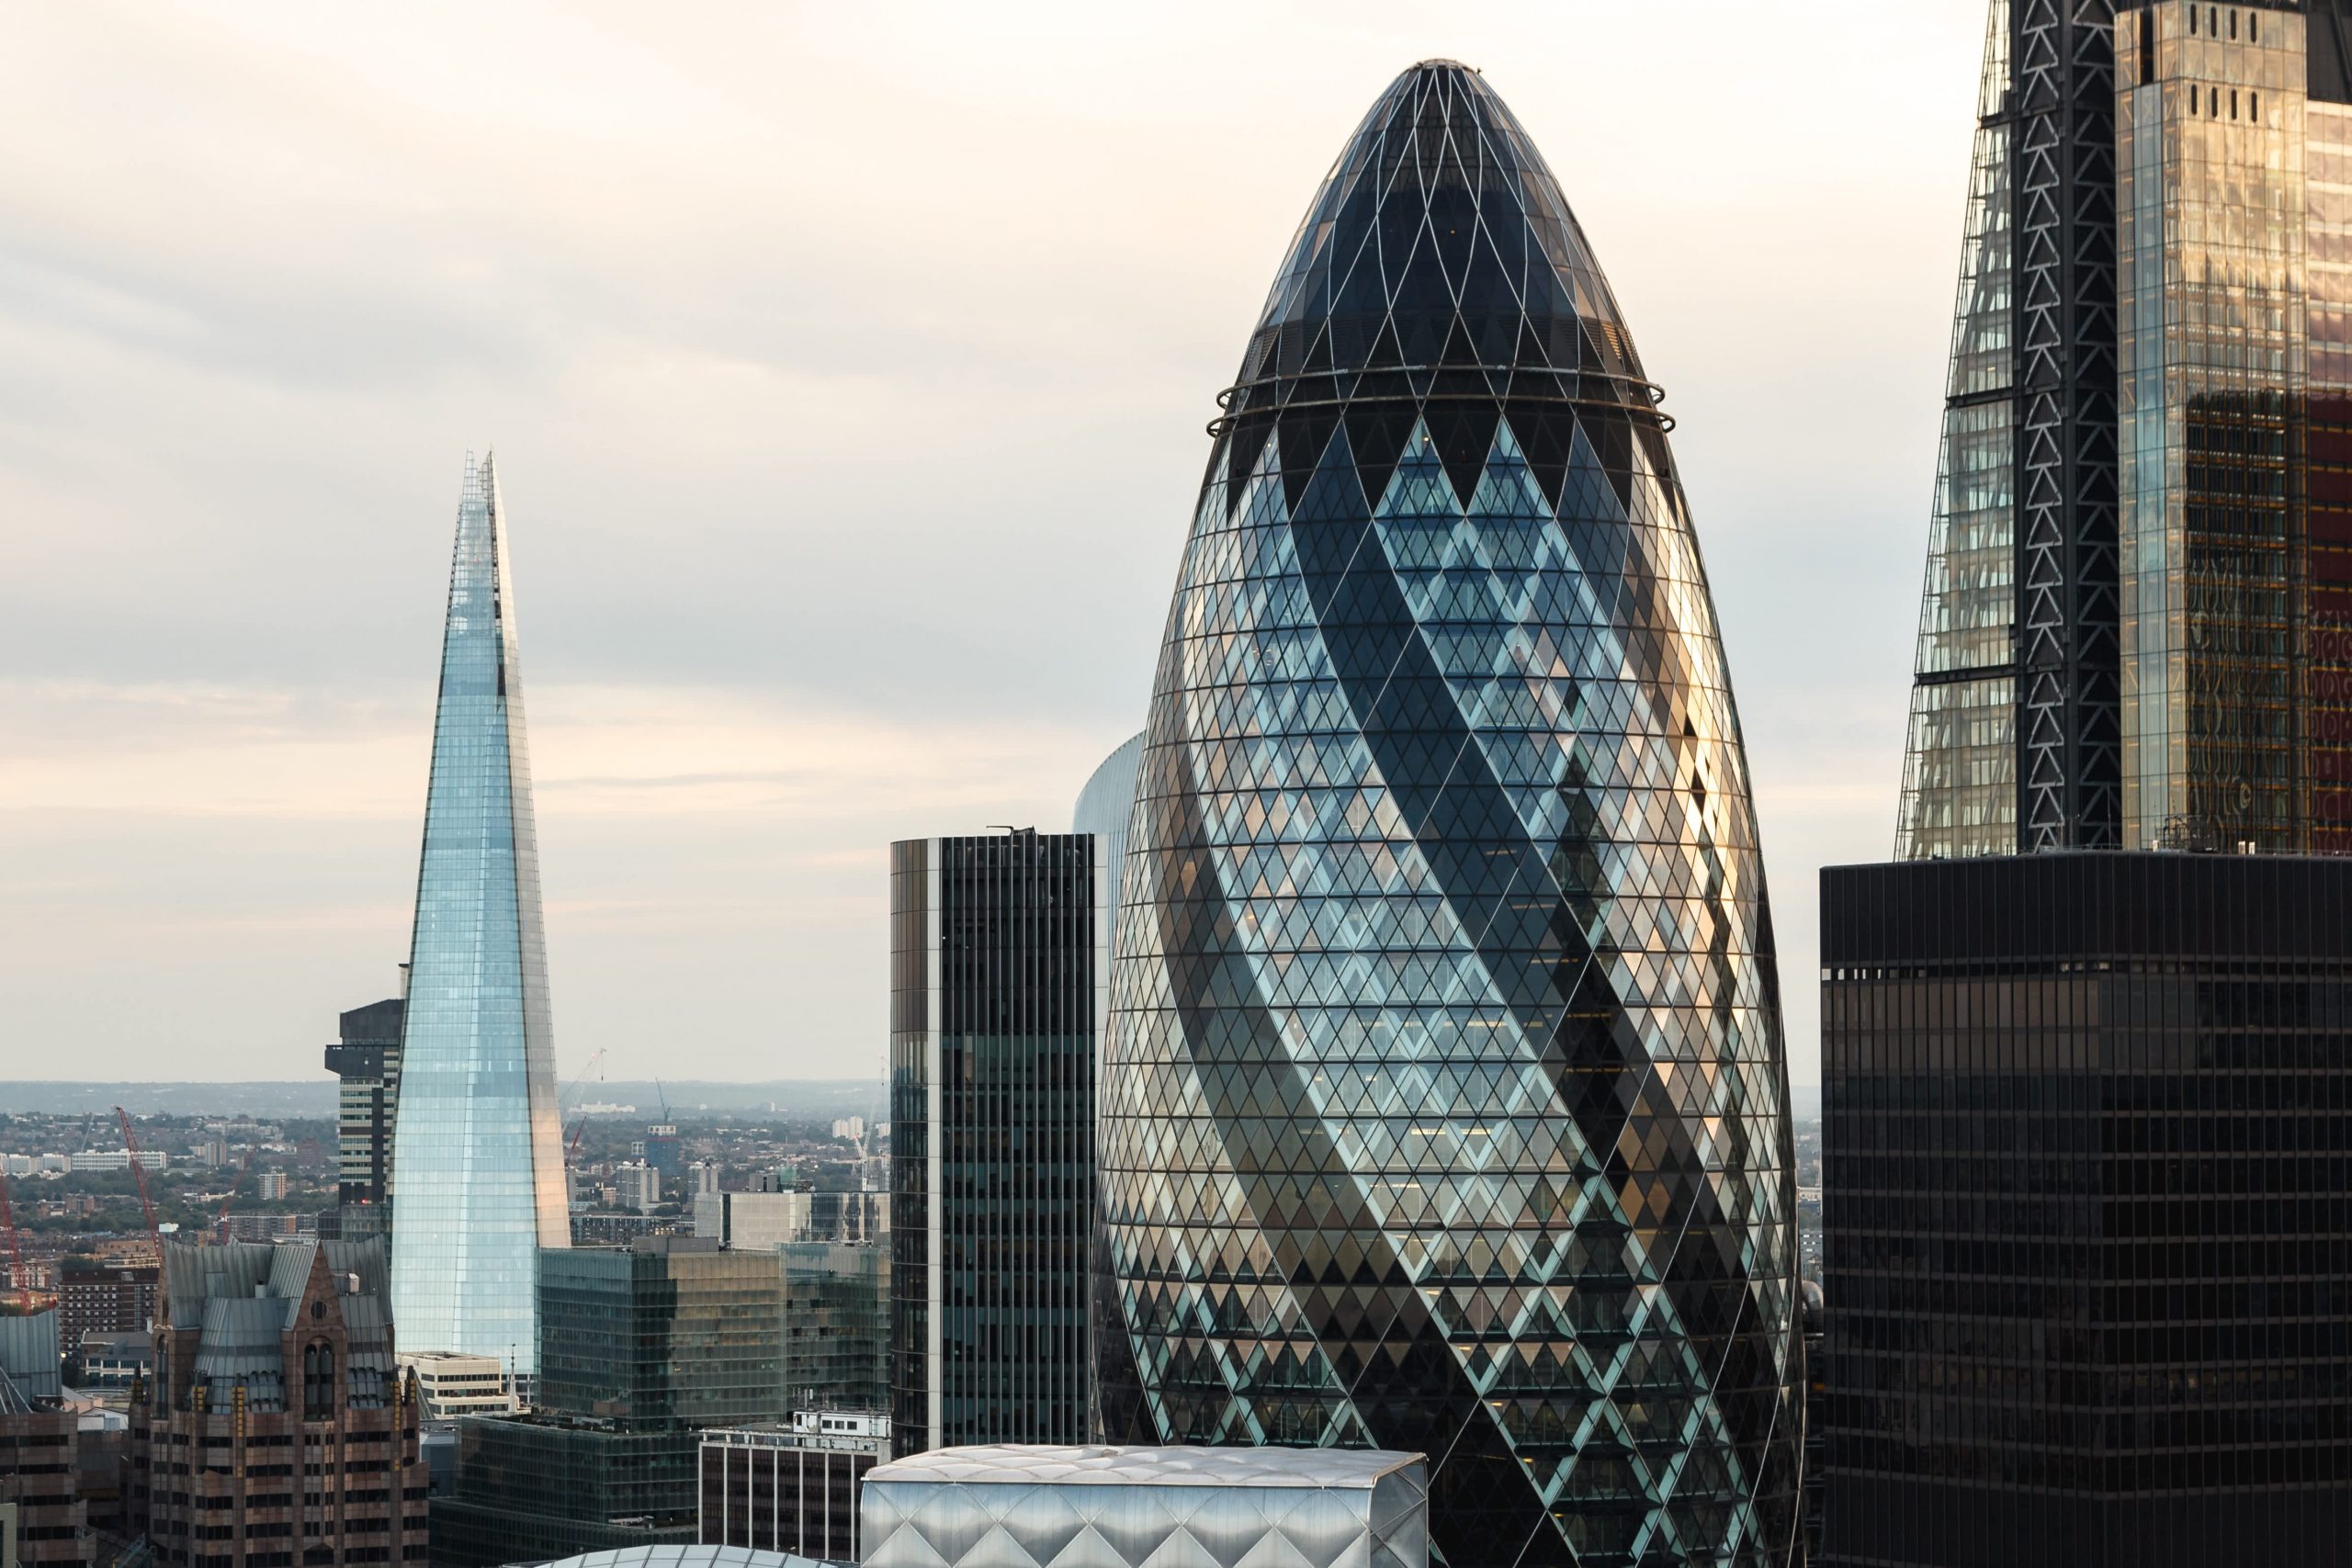 5 Key Takeaways from Our Fire Roundtable at The Gherkin